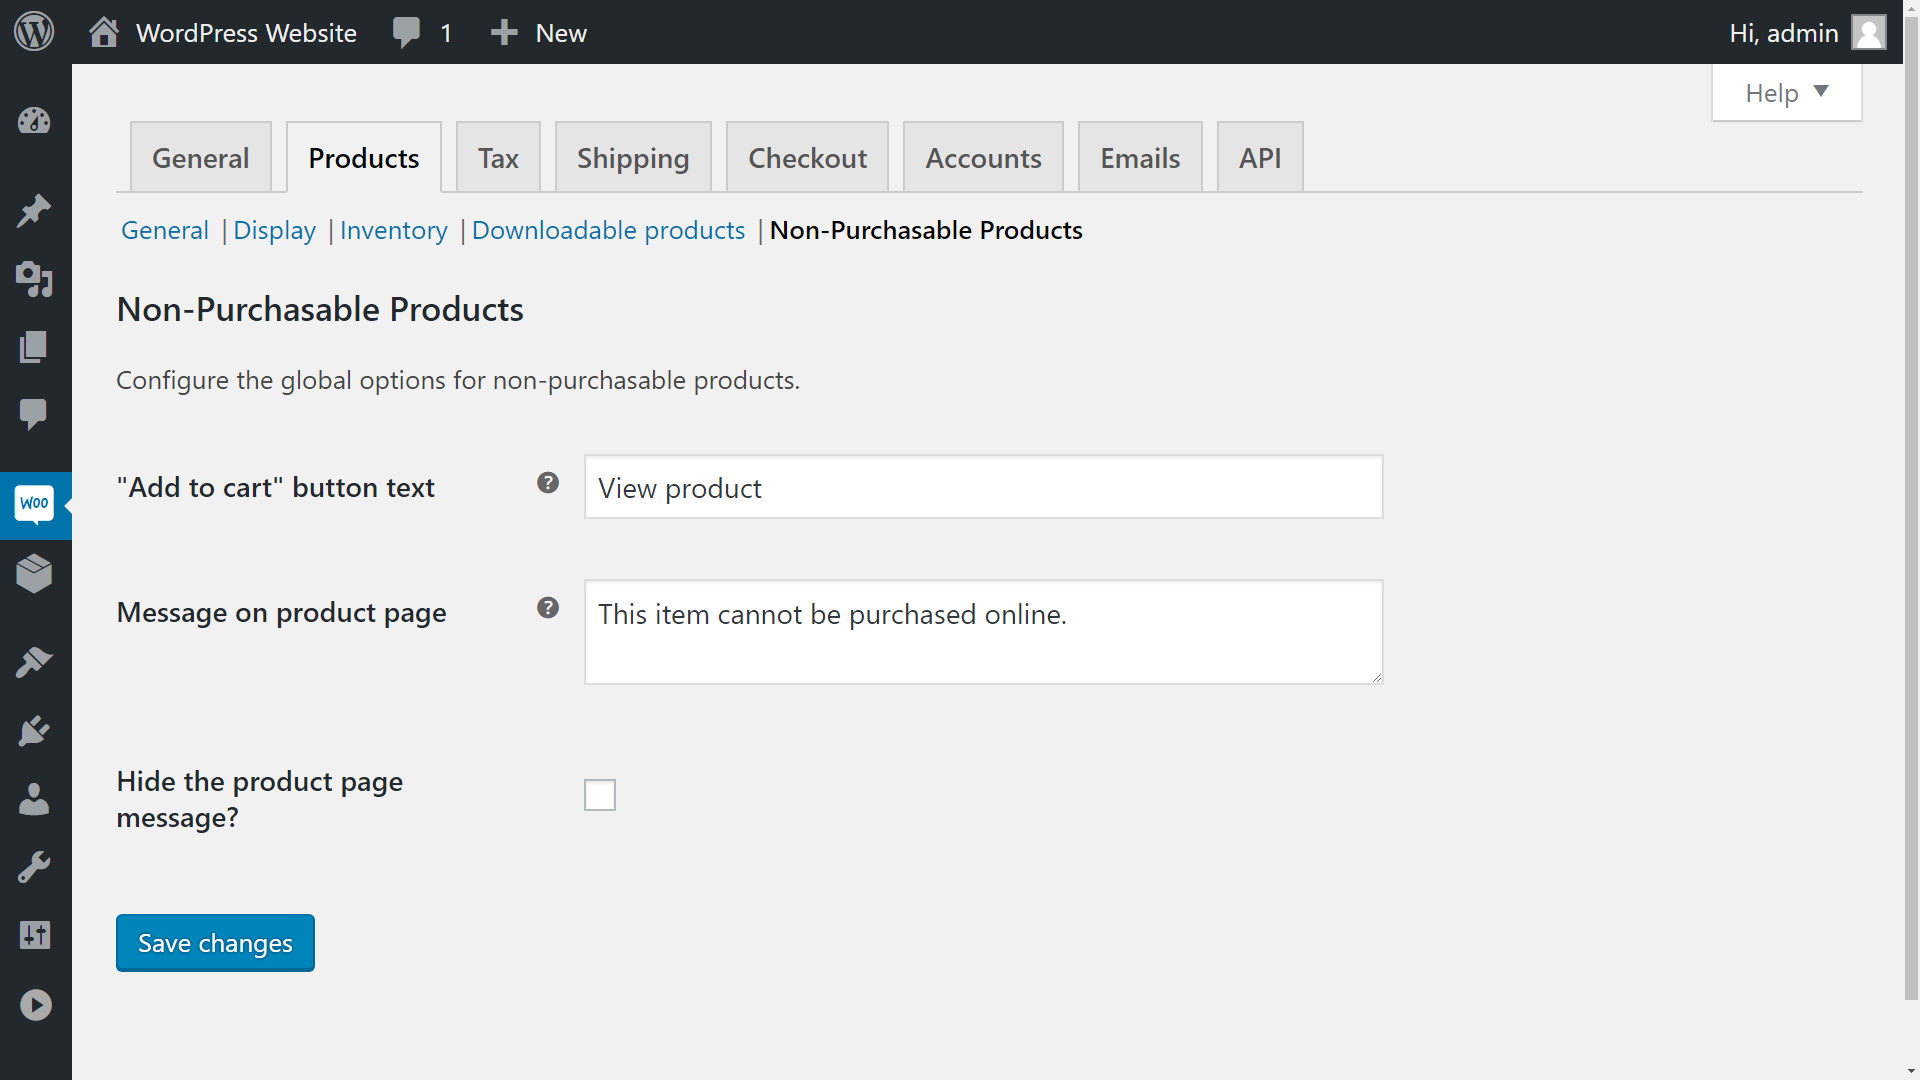 Set custom text for the archive page button or single product page message.